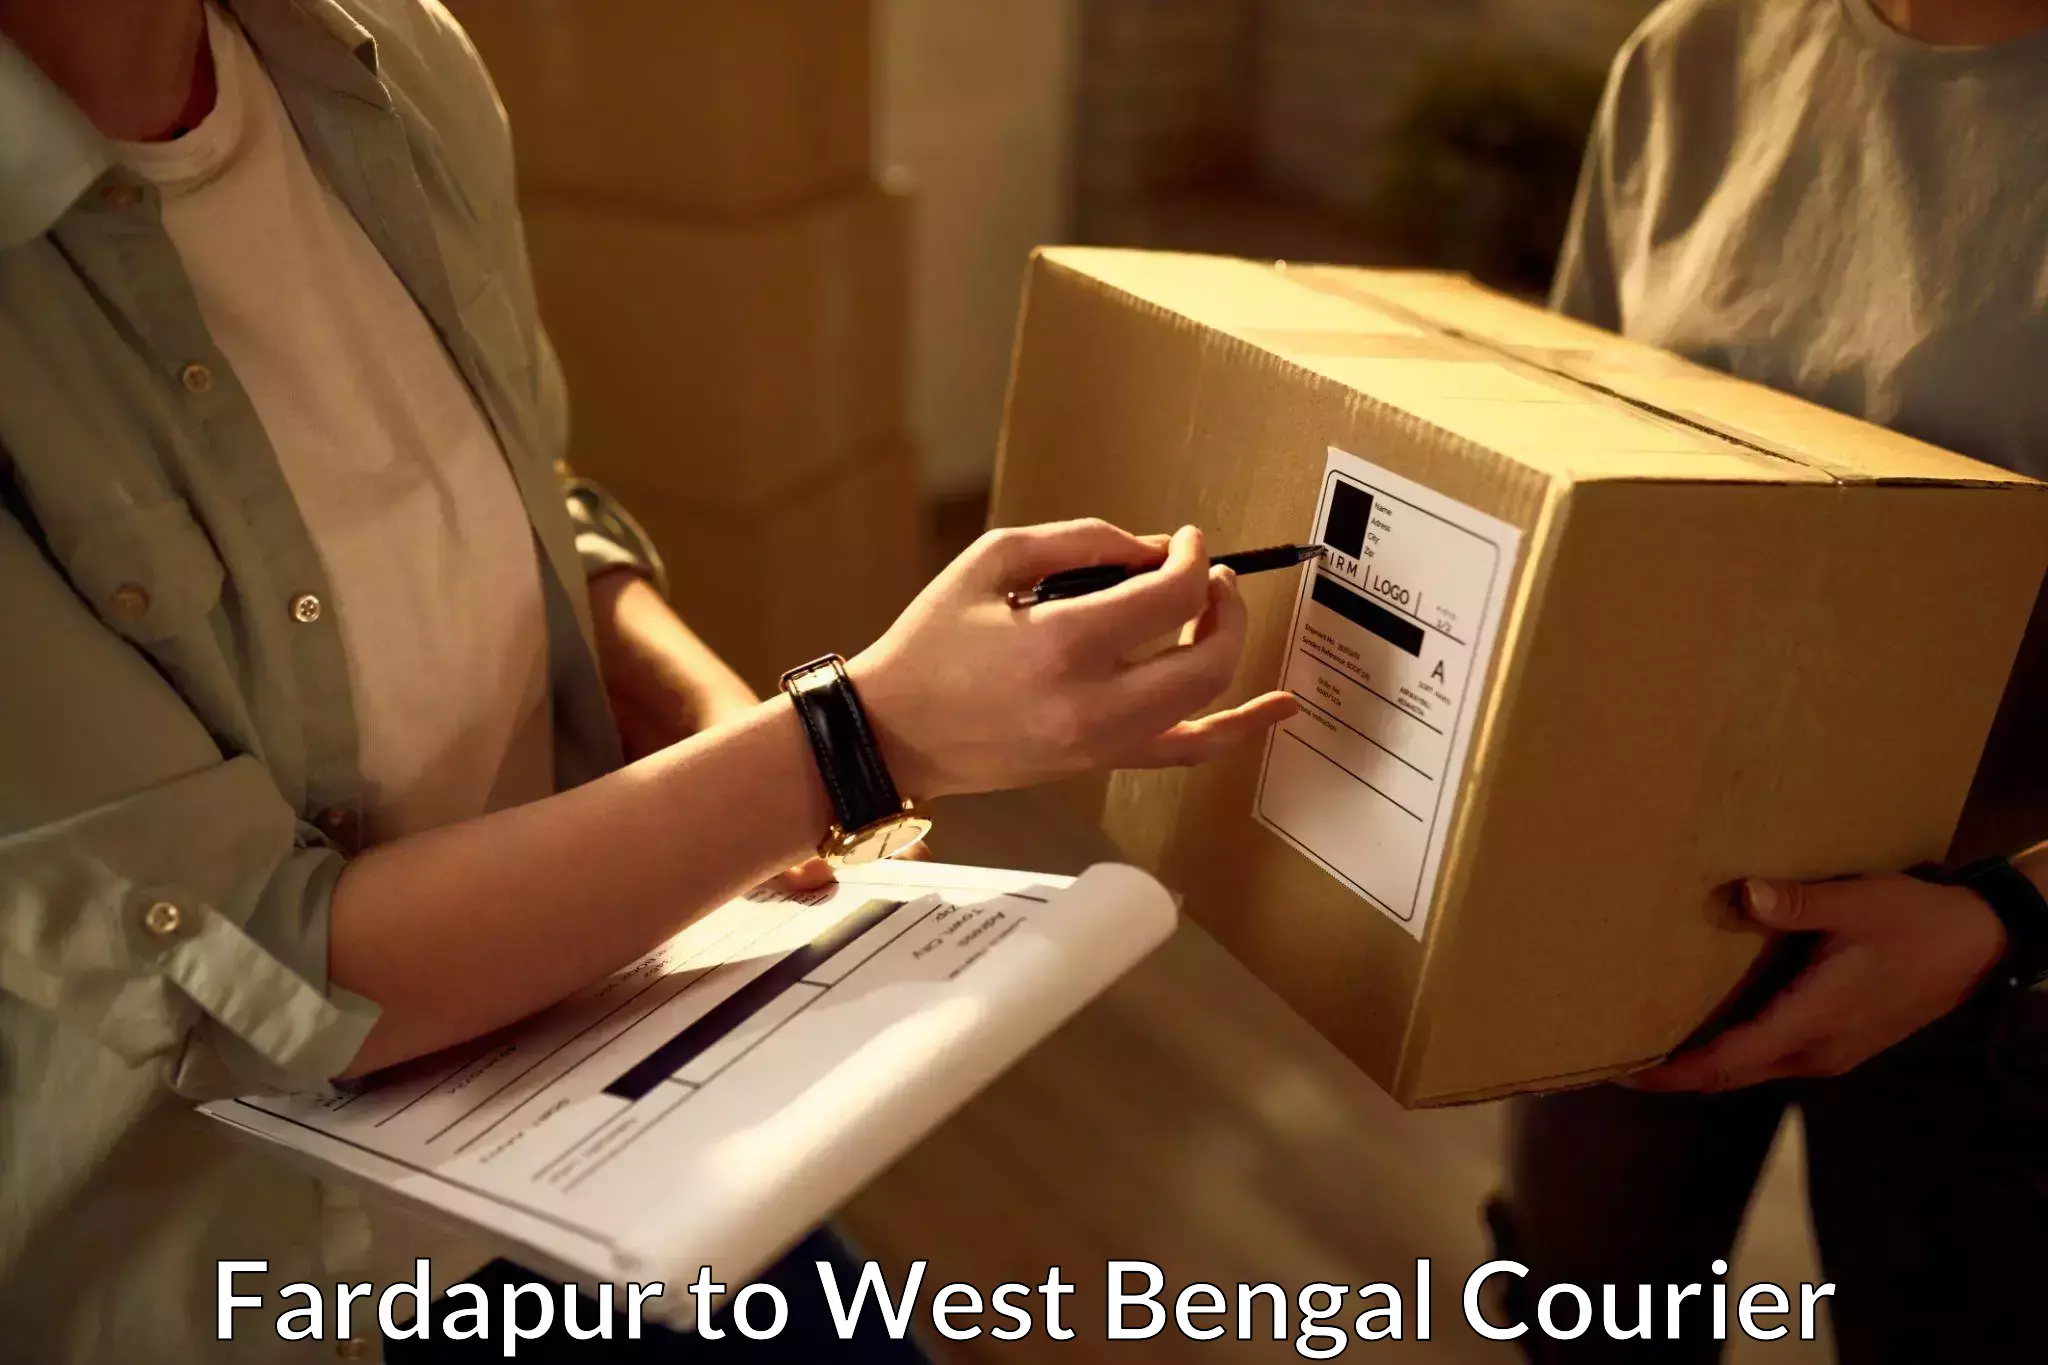 Reliable courier service Fardapur to West Bengal